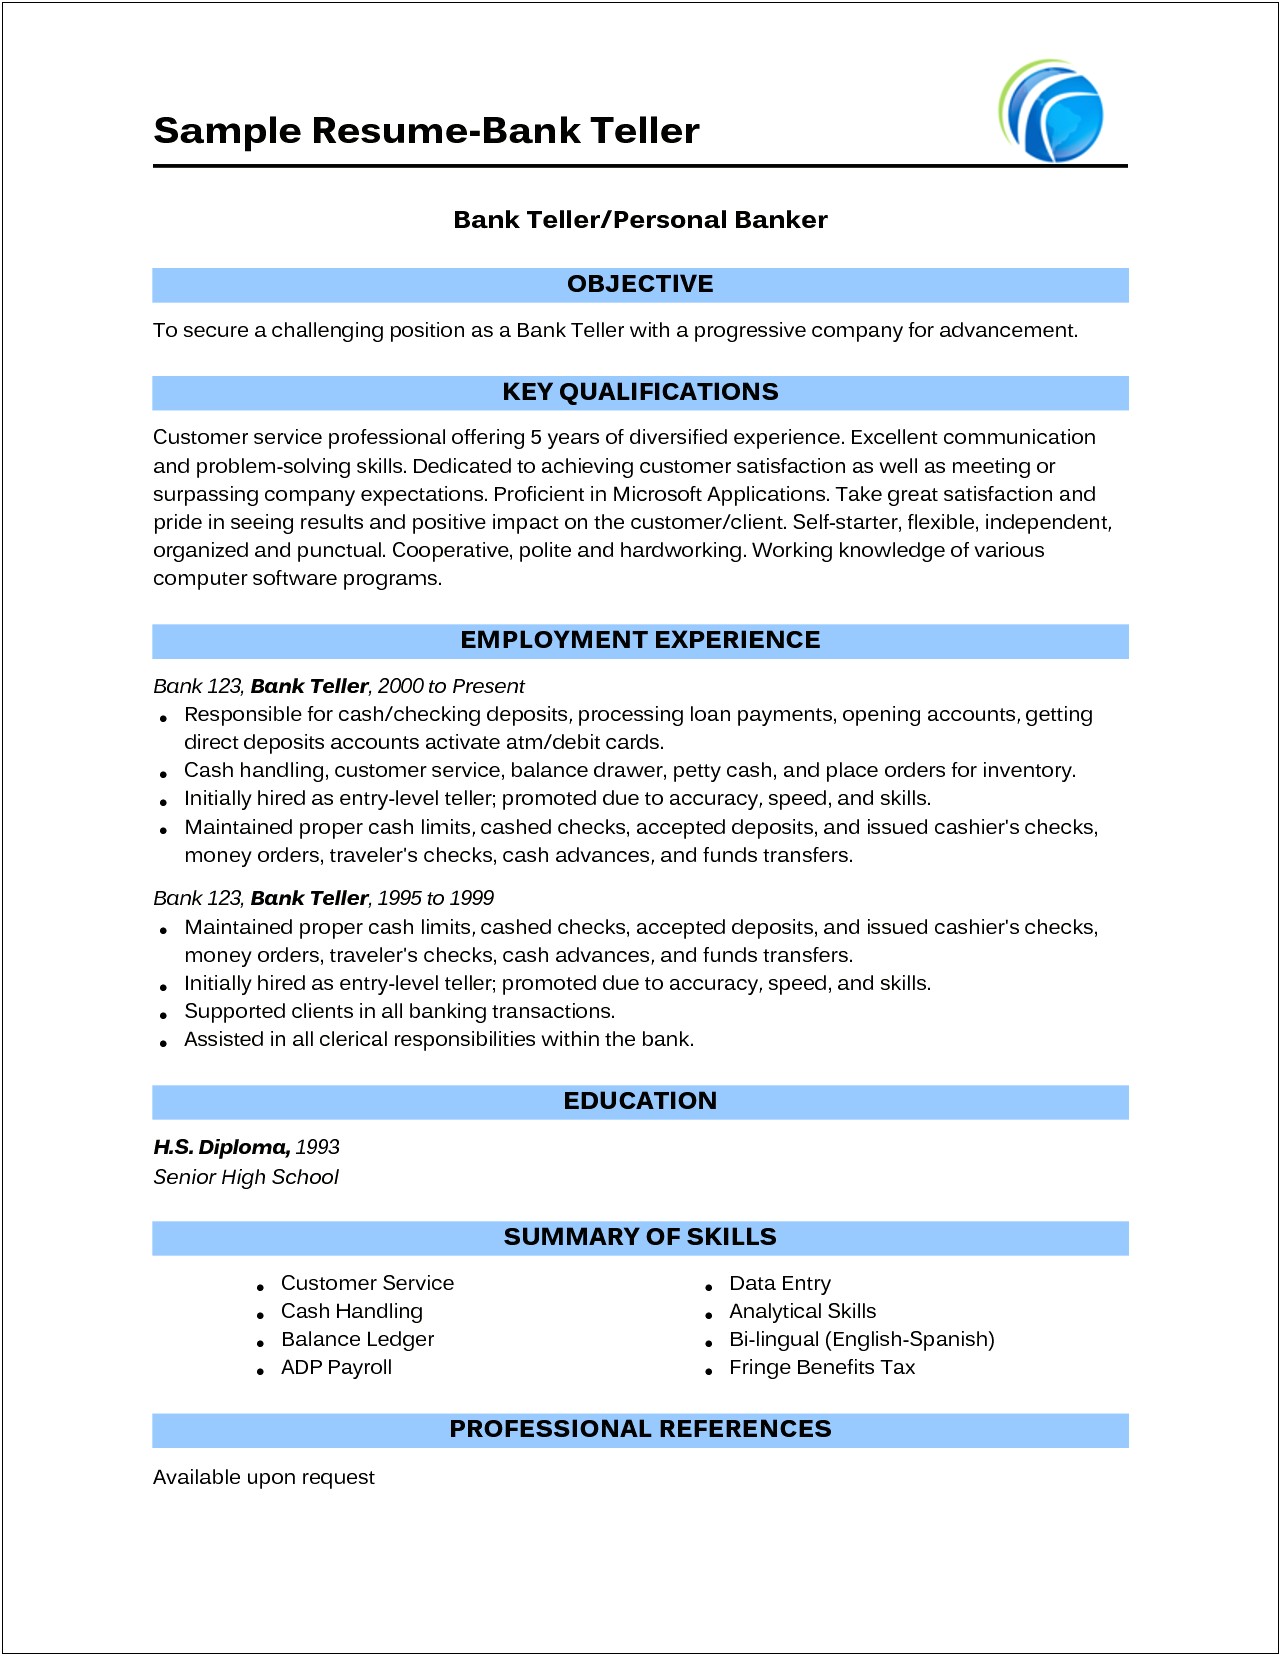 Skills For A Personal Banker Resume